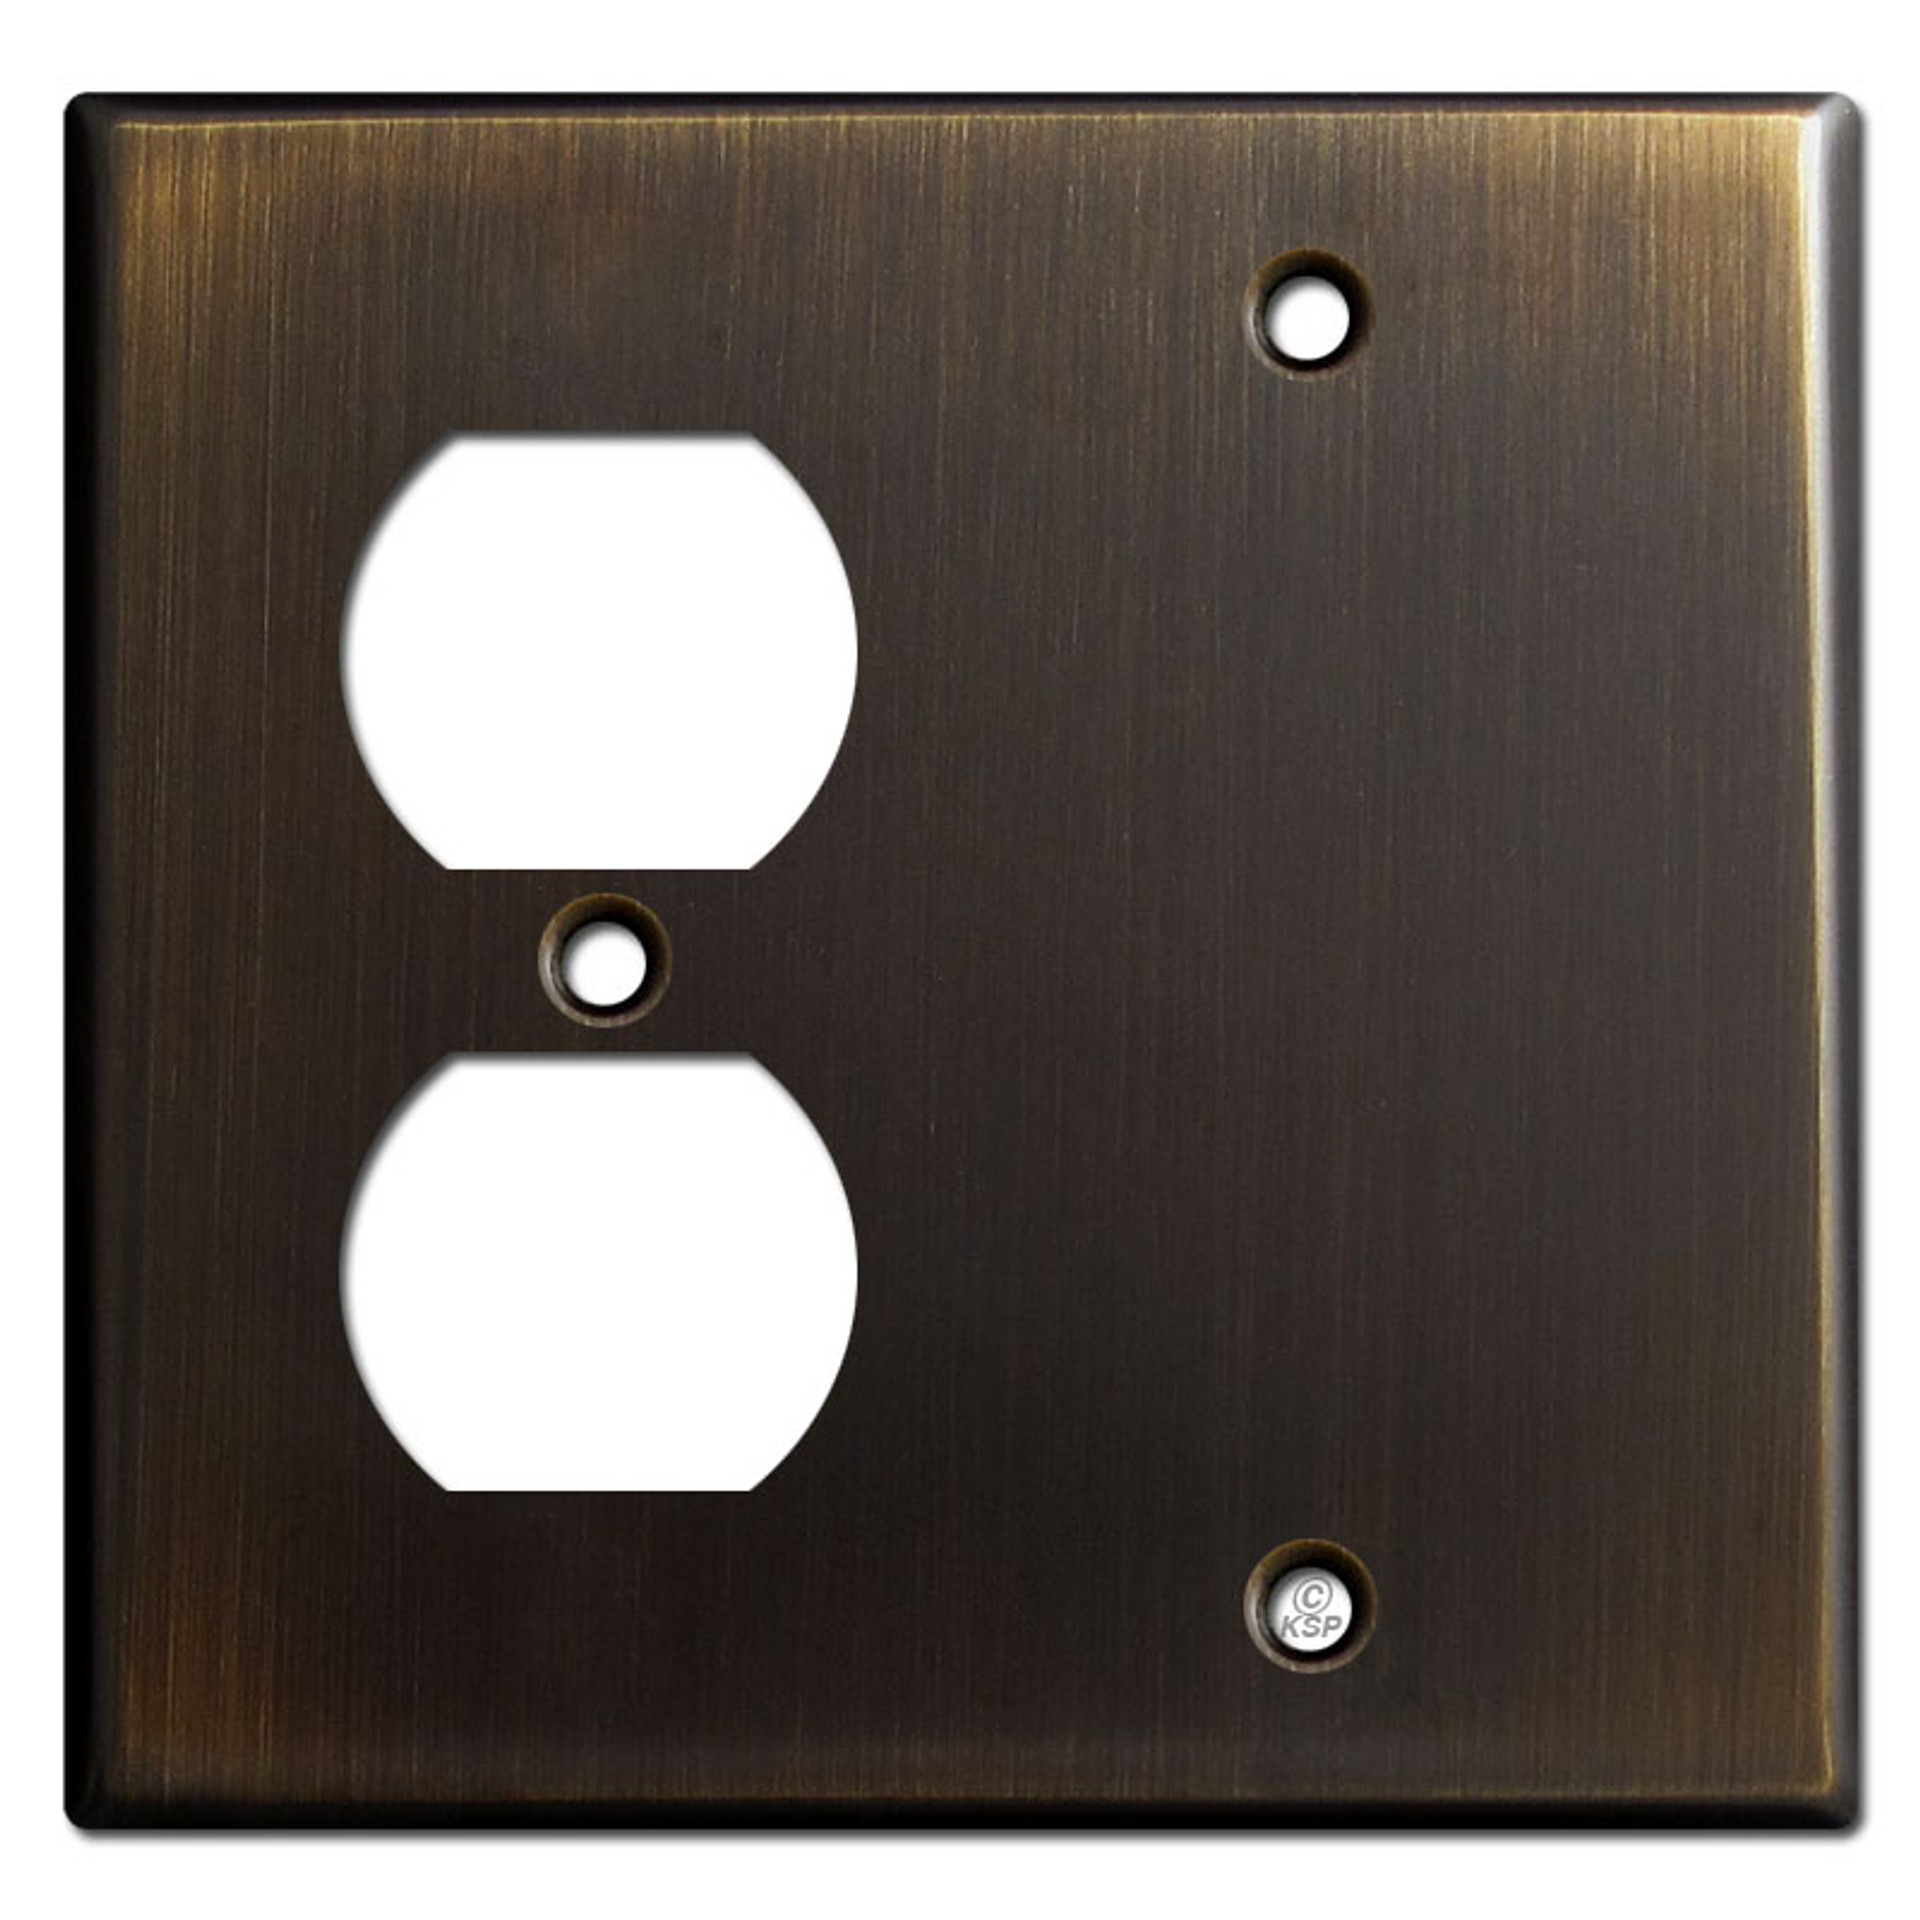 Electrical Wall Plates Outlet Wall Plates